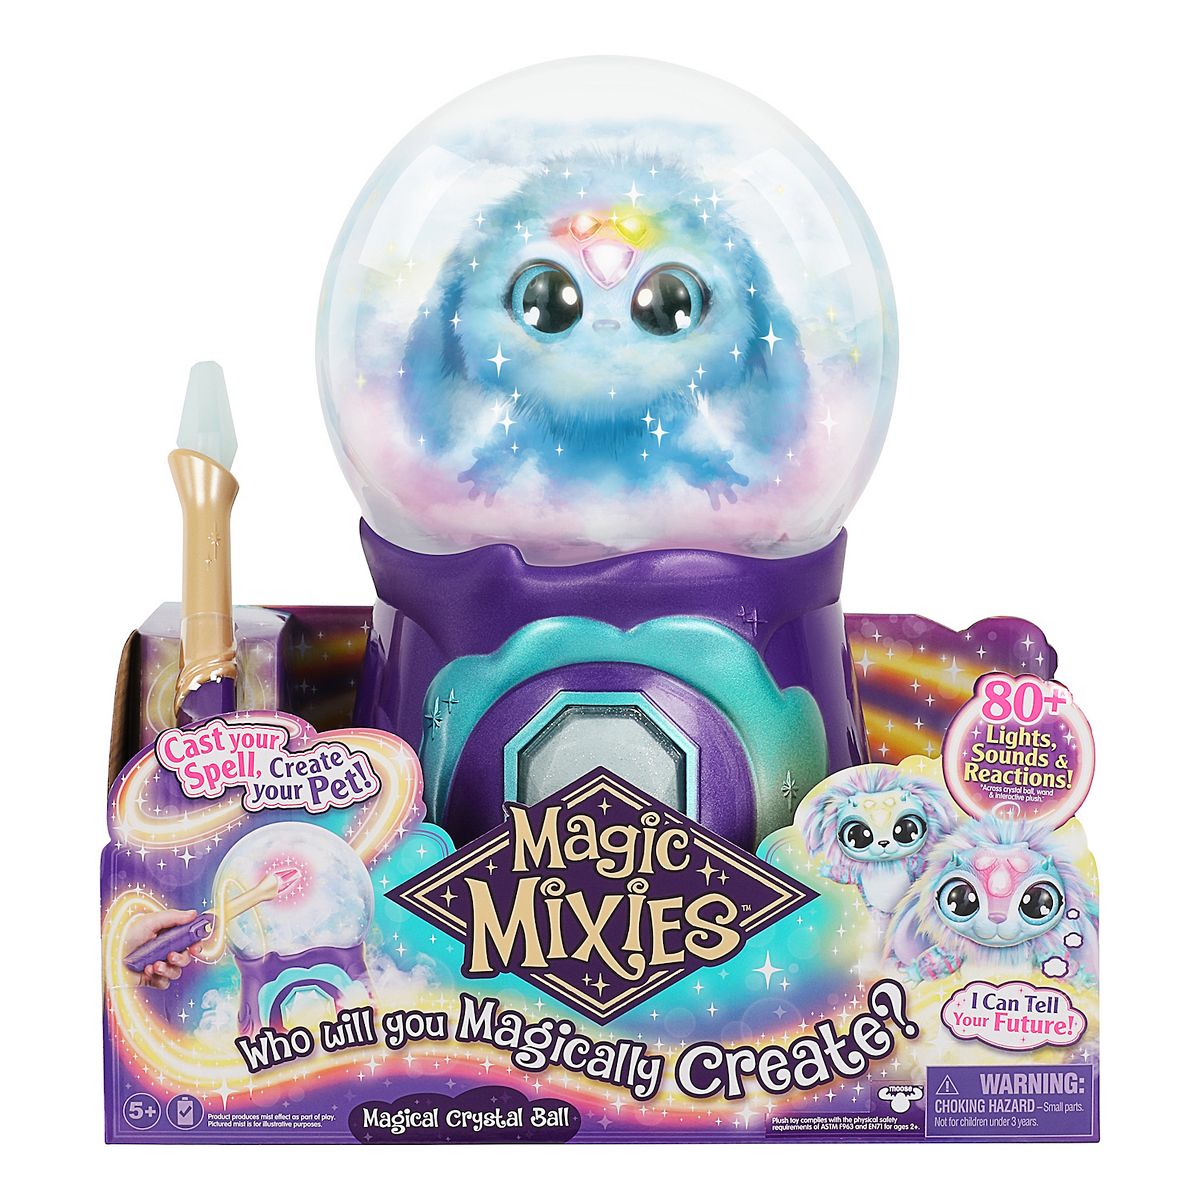 Magic Mixies Magical Misting Crystal Ball w/ 8" Plush Toy and 80+ Sounds and Reactions (Blue or Pink) $38.85 + Free Shipping